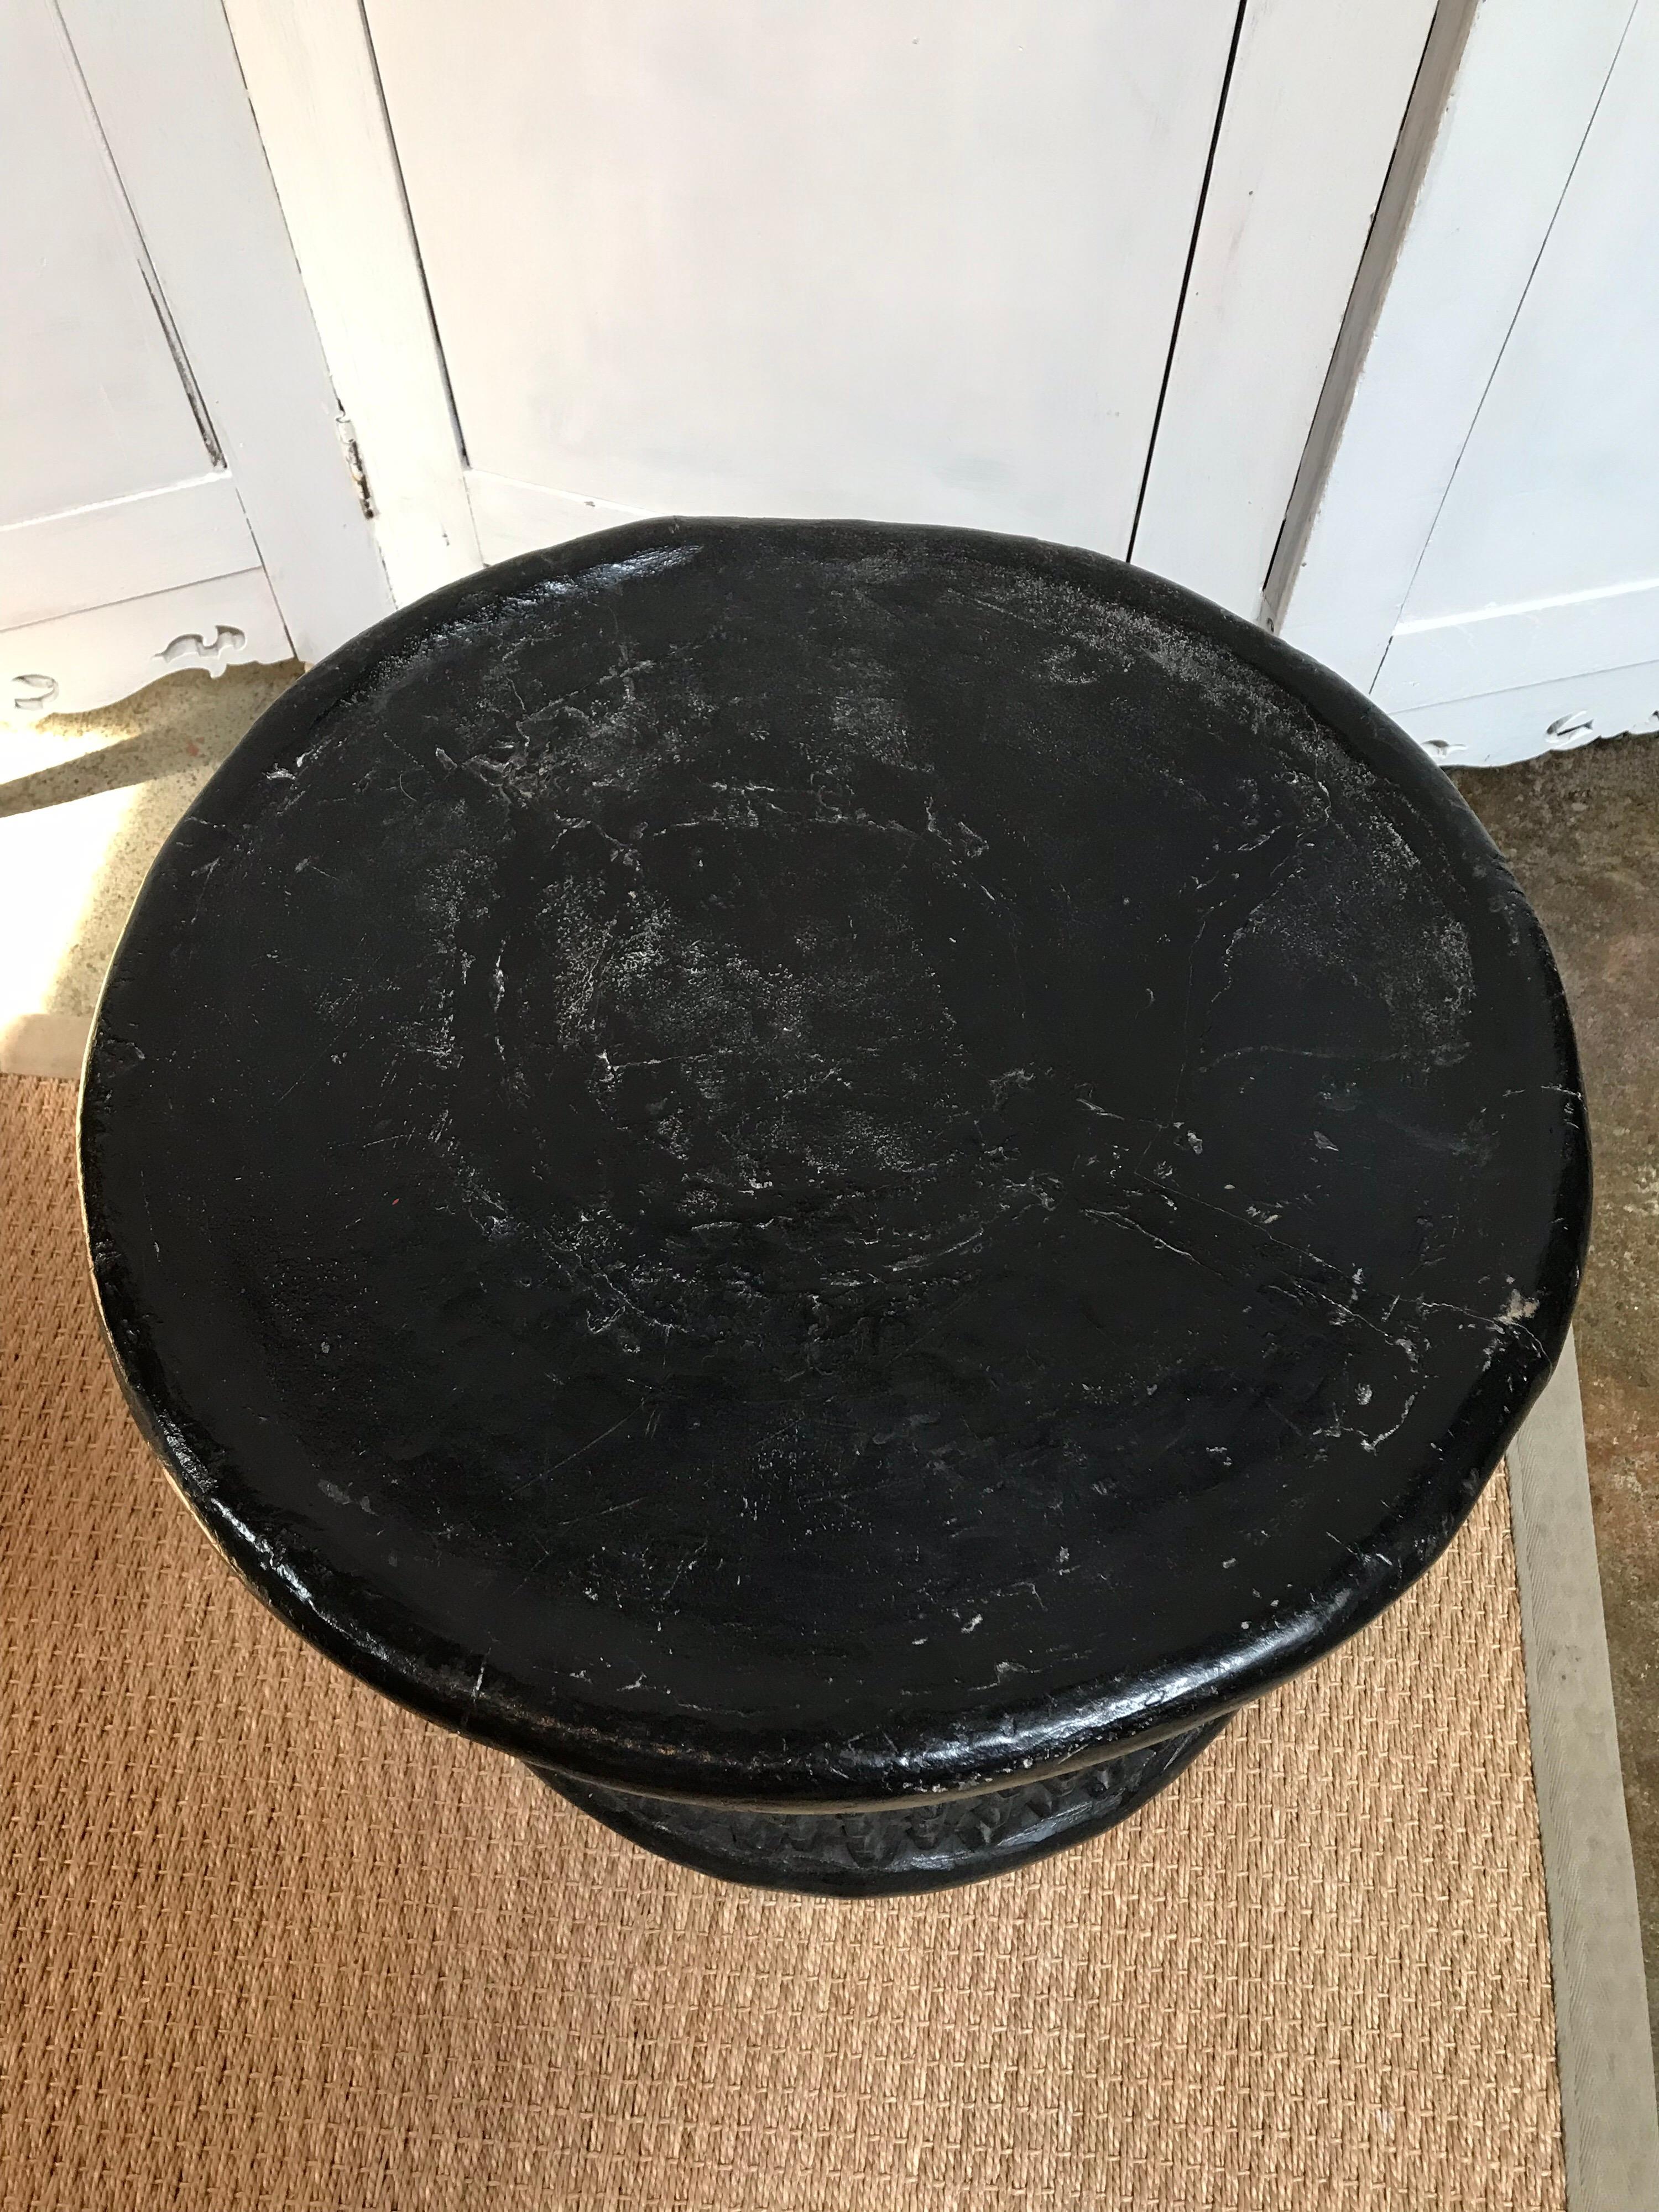 This circular table was handmade by the Cameroon people from Central Africa. It's black with a smooth top and has a bumpy textured, grated pattern for its base.